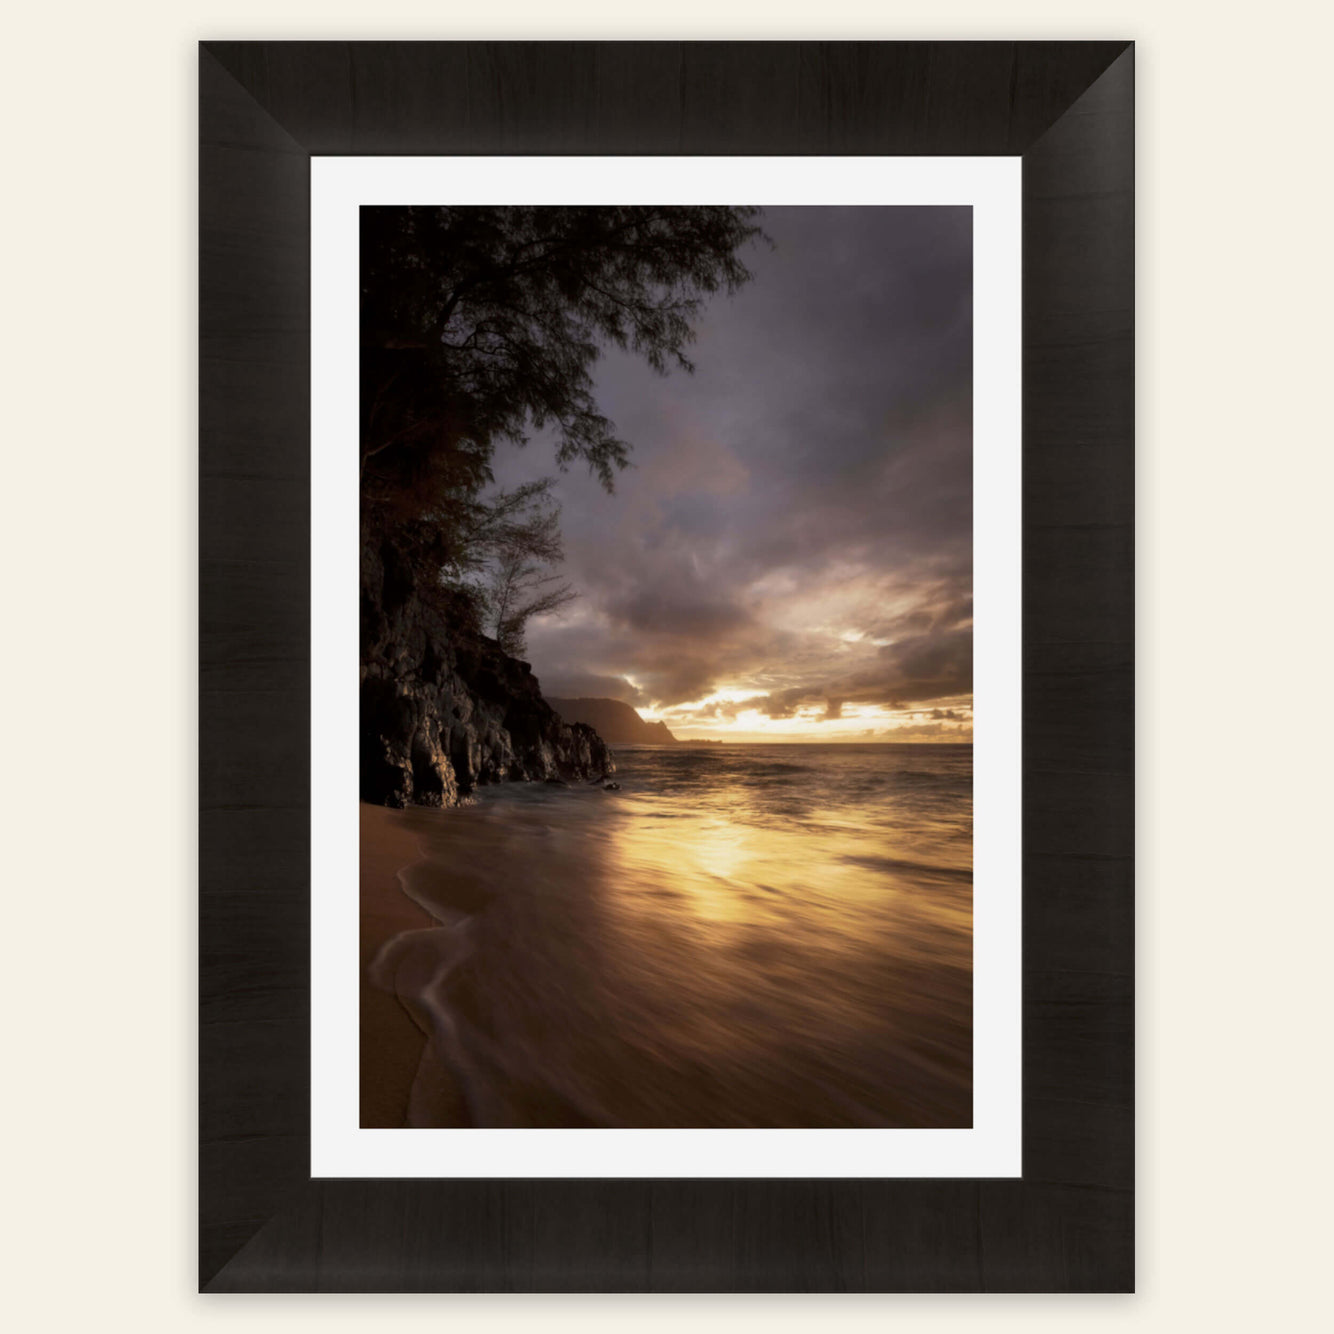 A framed Hideaway Beach picture from one of the best beaches on Kauai.